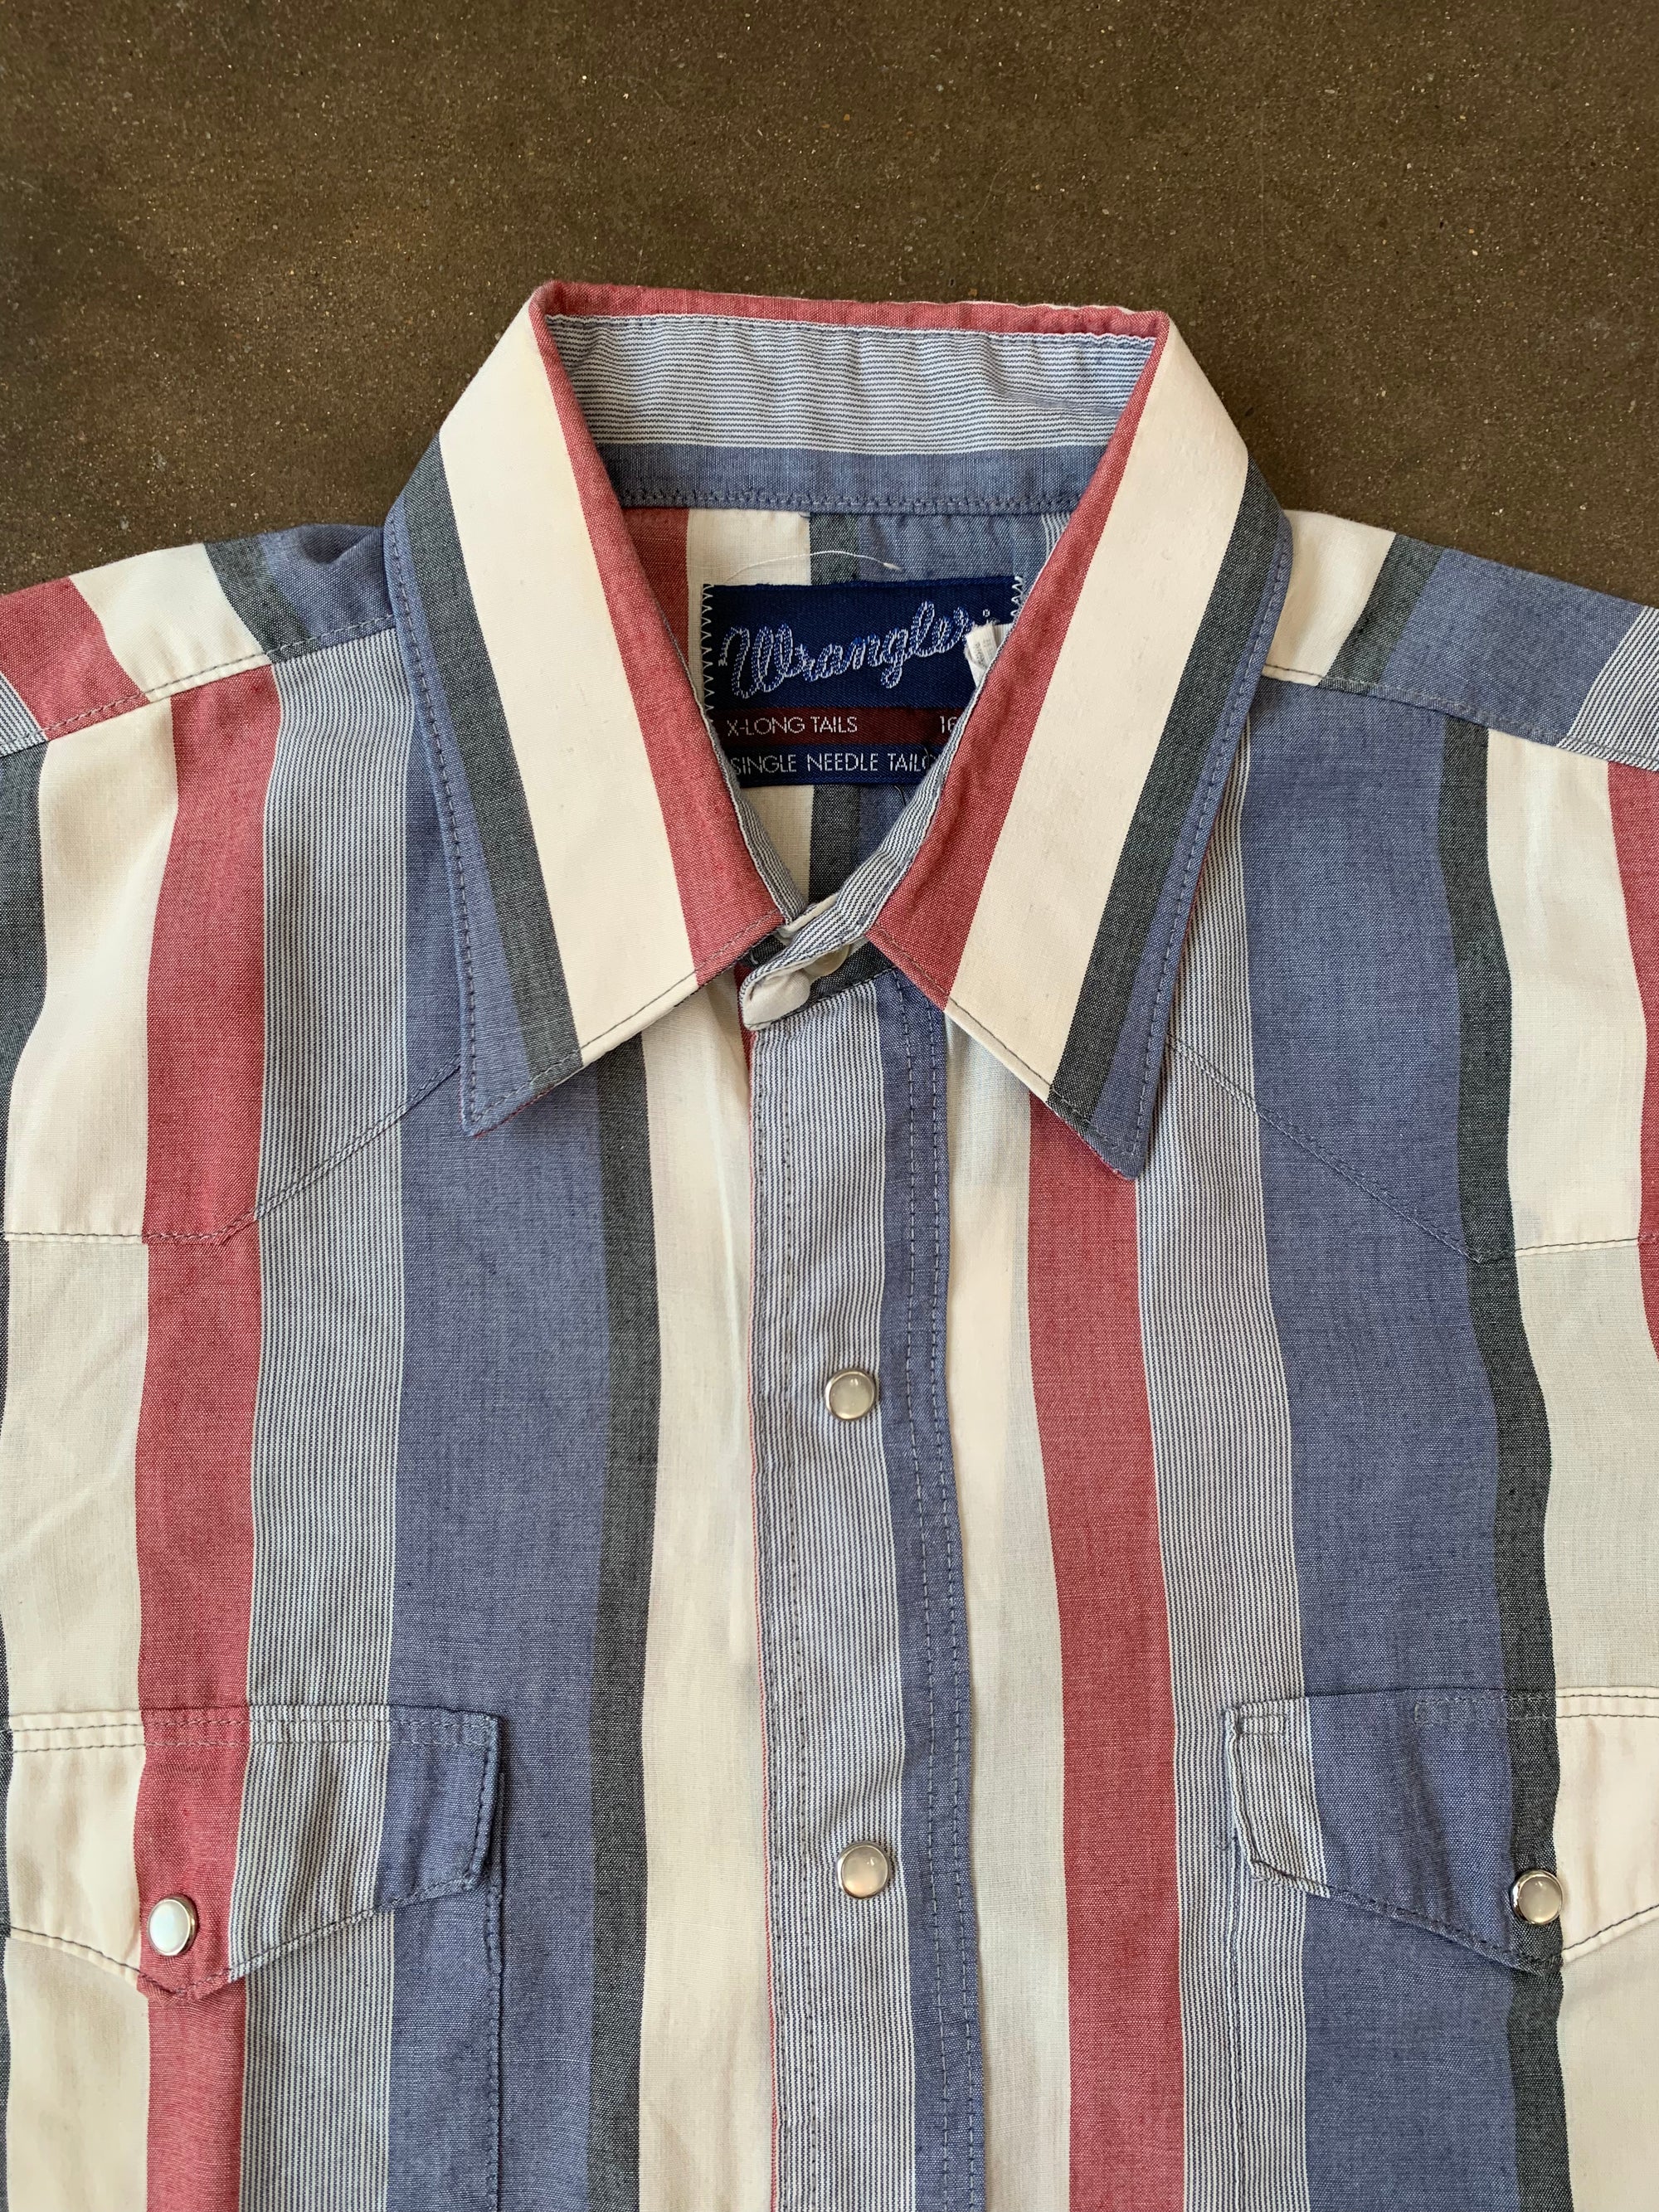 Vintage Wrangler Red White and Blue Striped Short Sleeve Pearl Snap